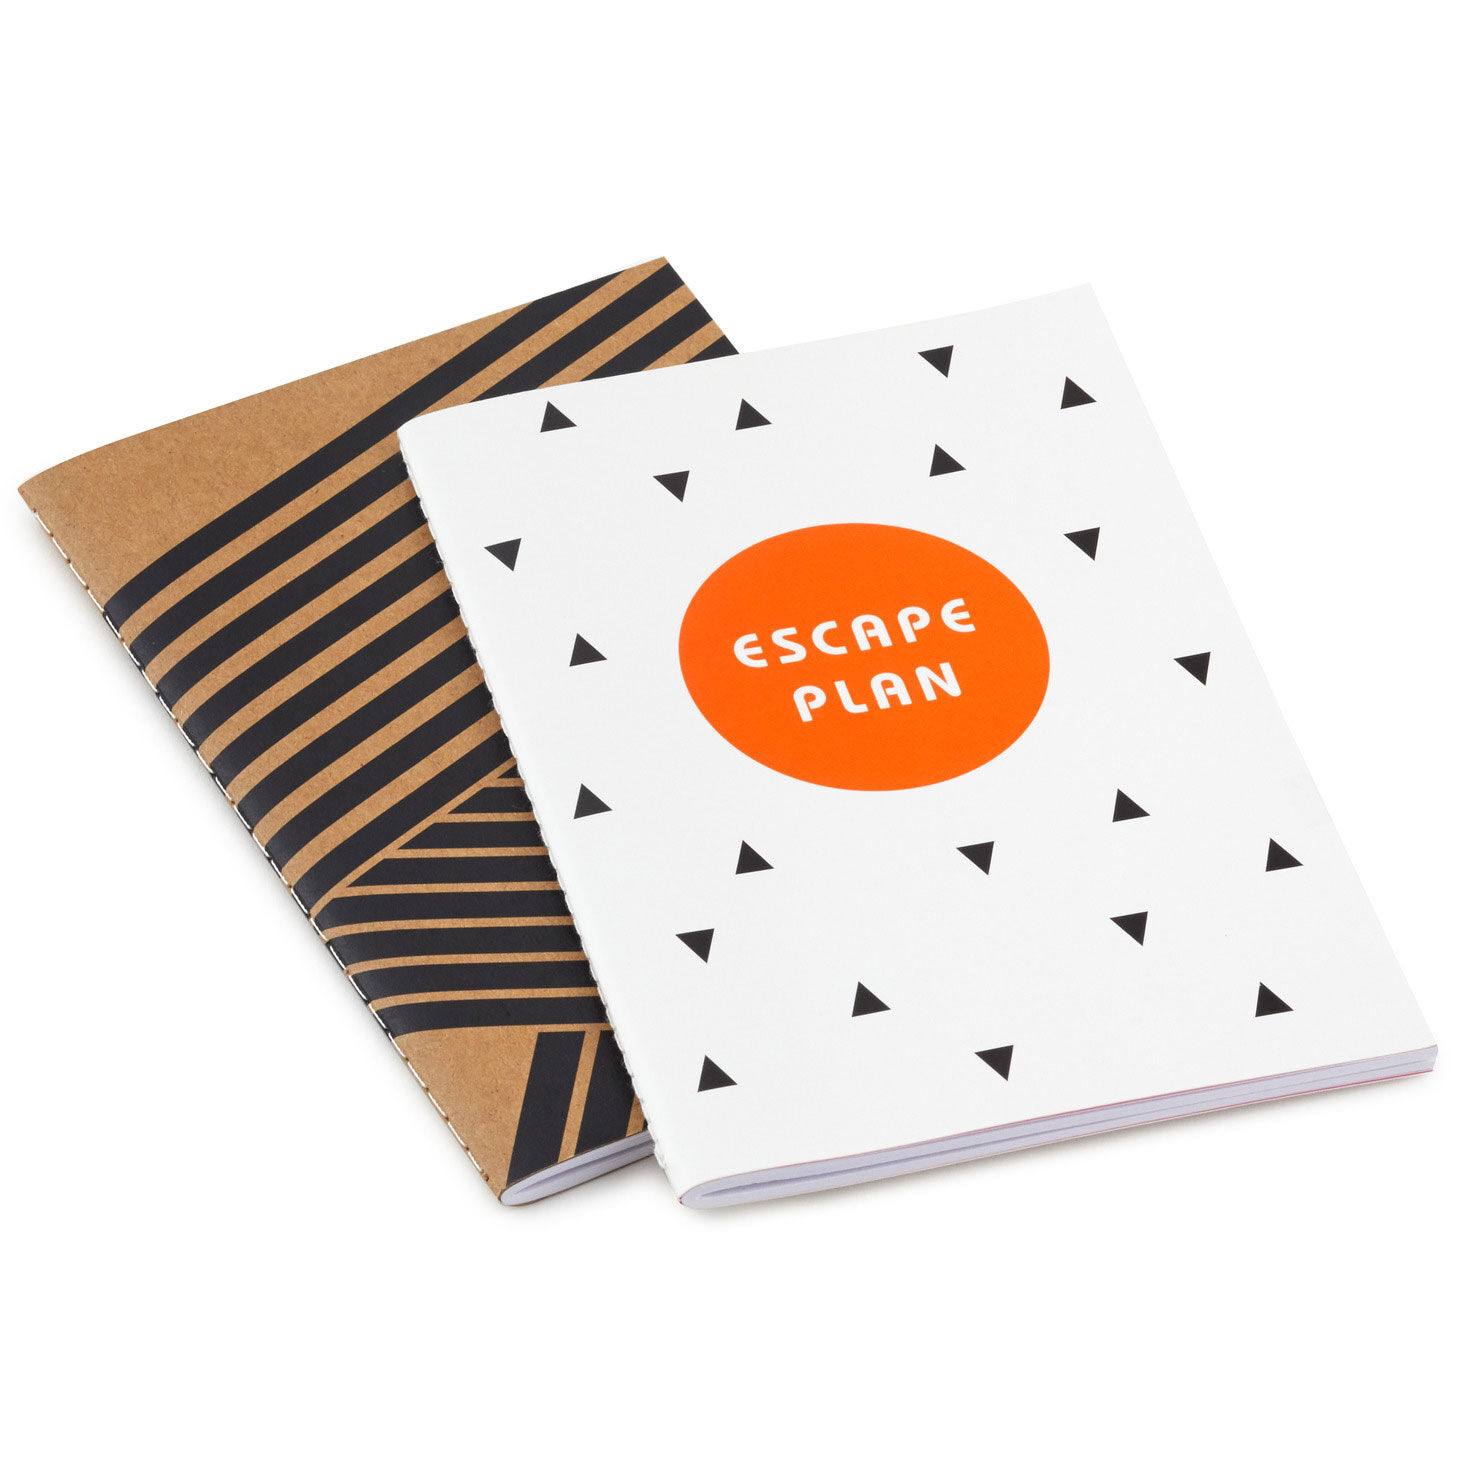 Escape Plan Notebooks, Set of 2 for only USD 7.99 | Hallmark